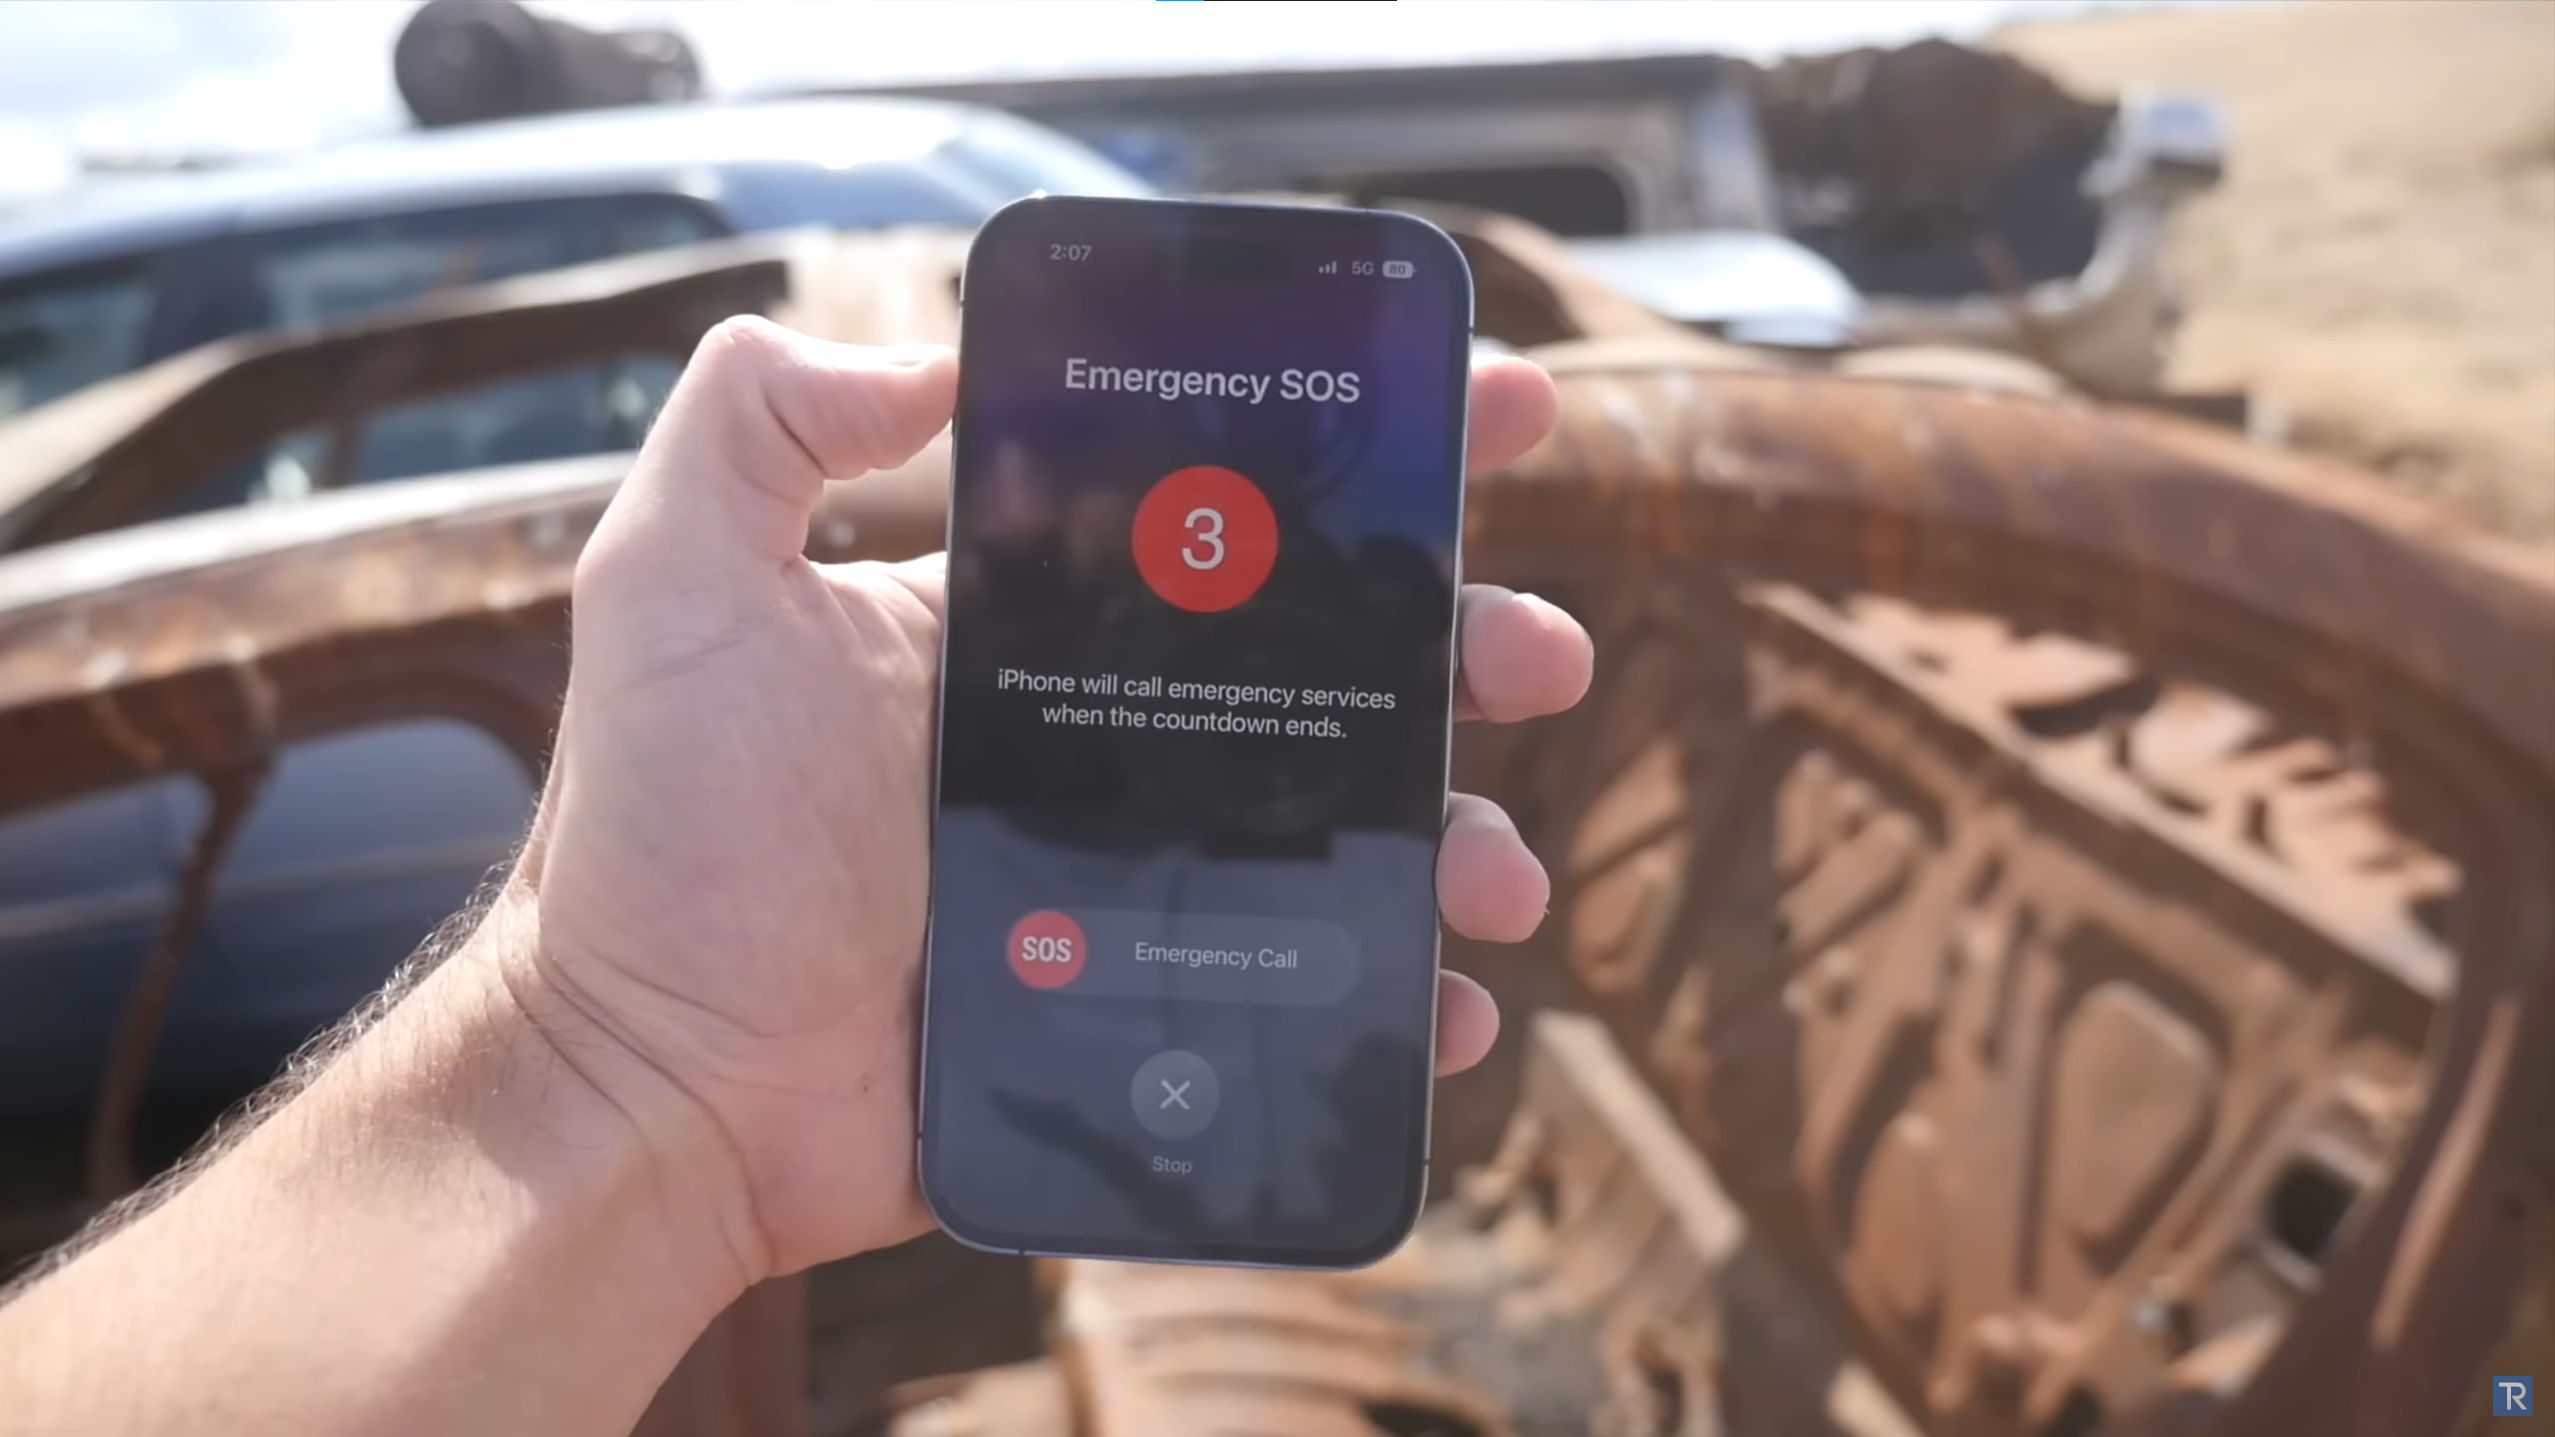 An image of an iPhone 14 Pro showing an emergency SOS notification after a simulated car crash